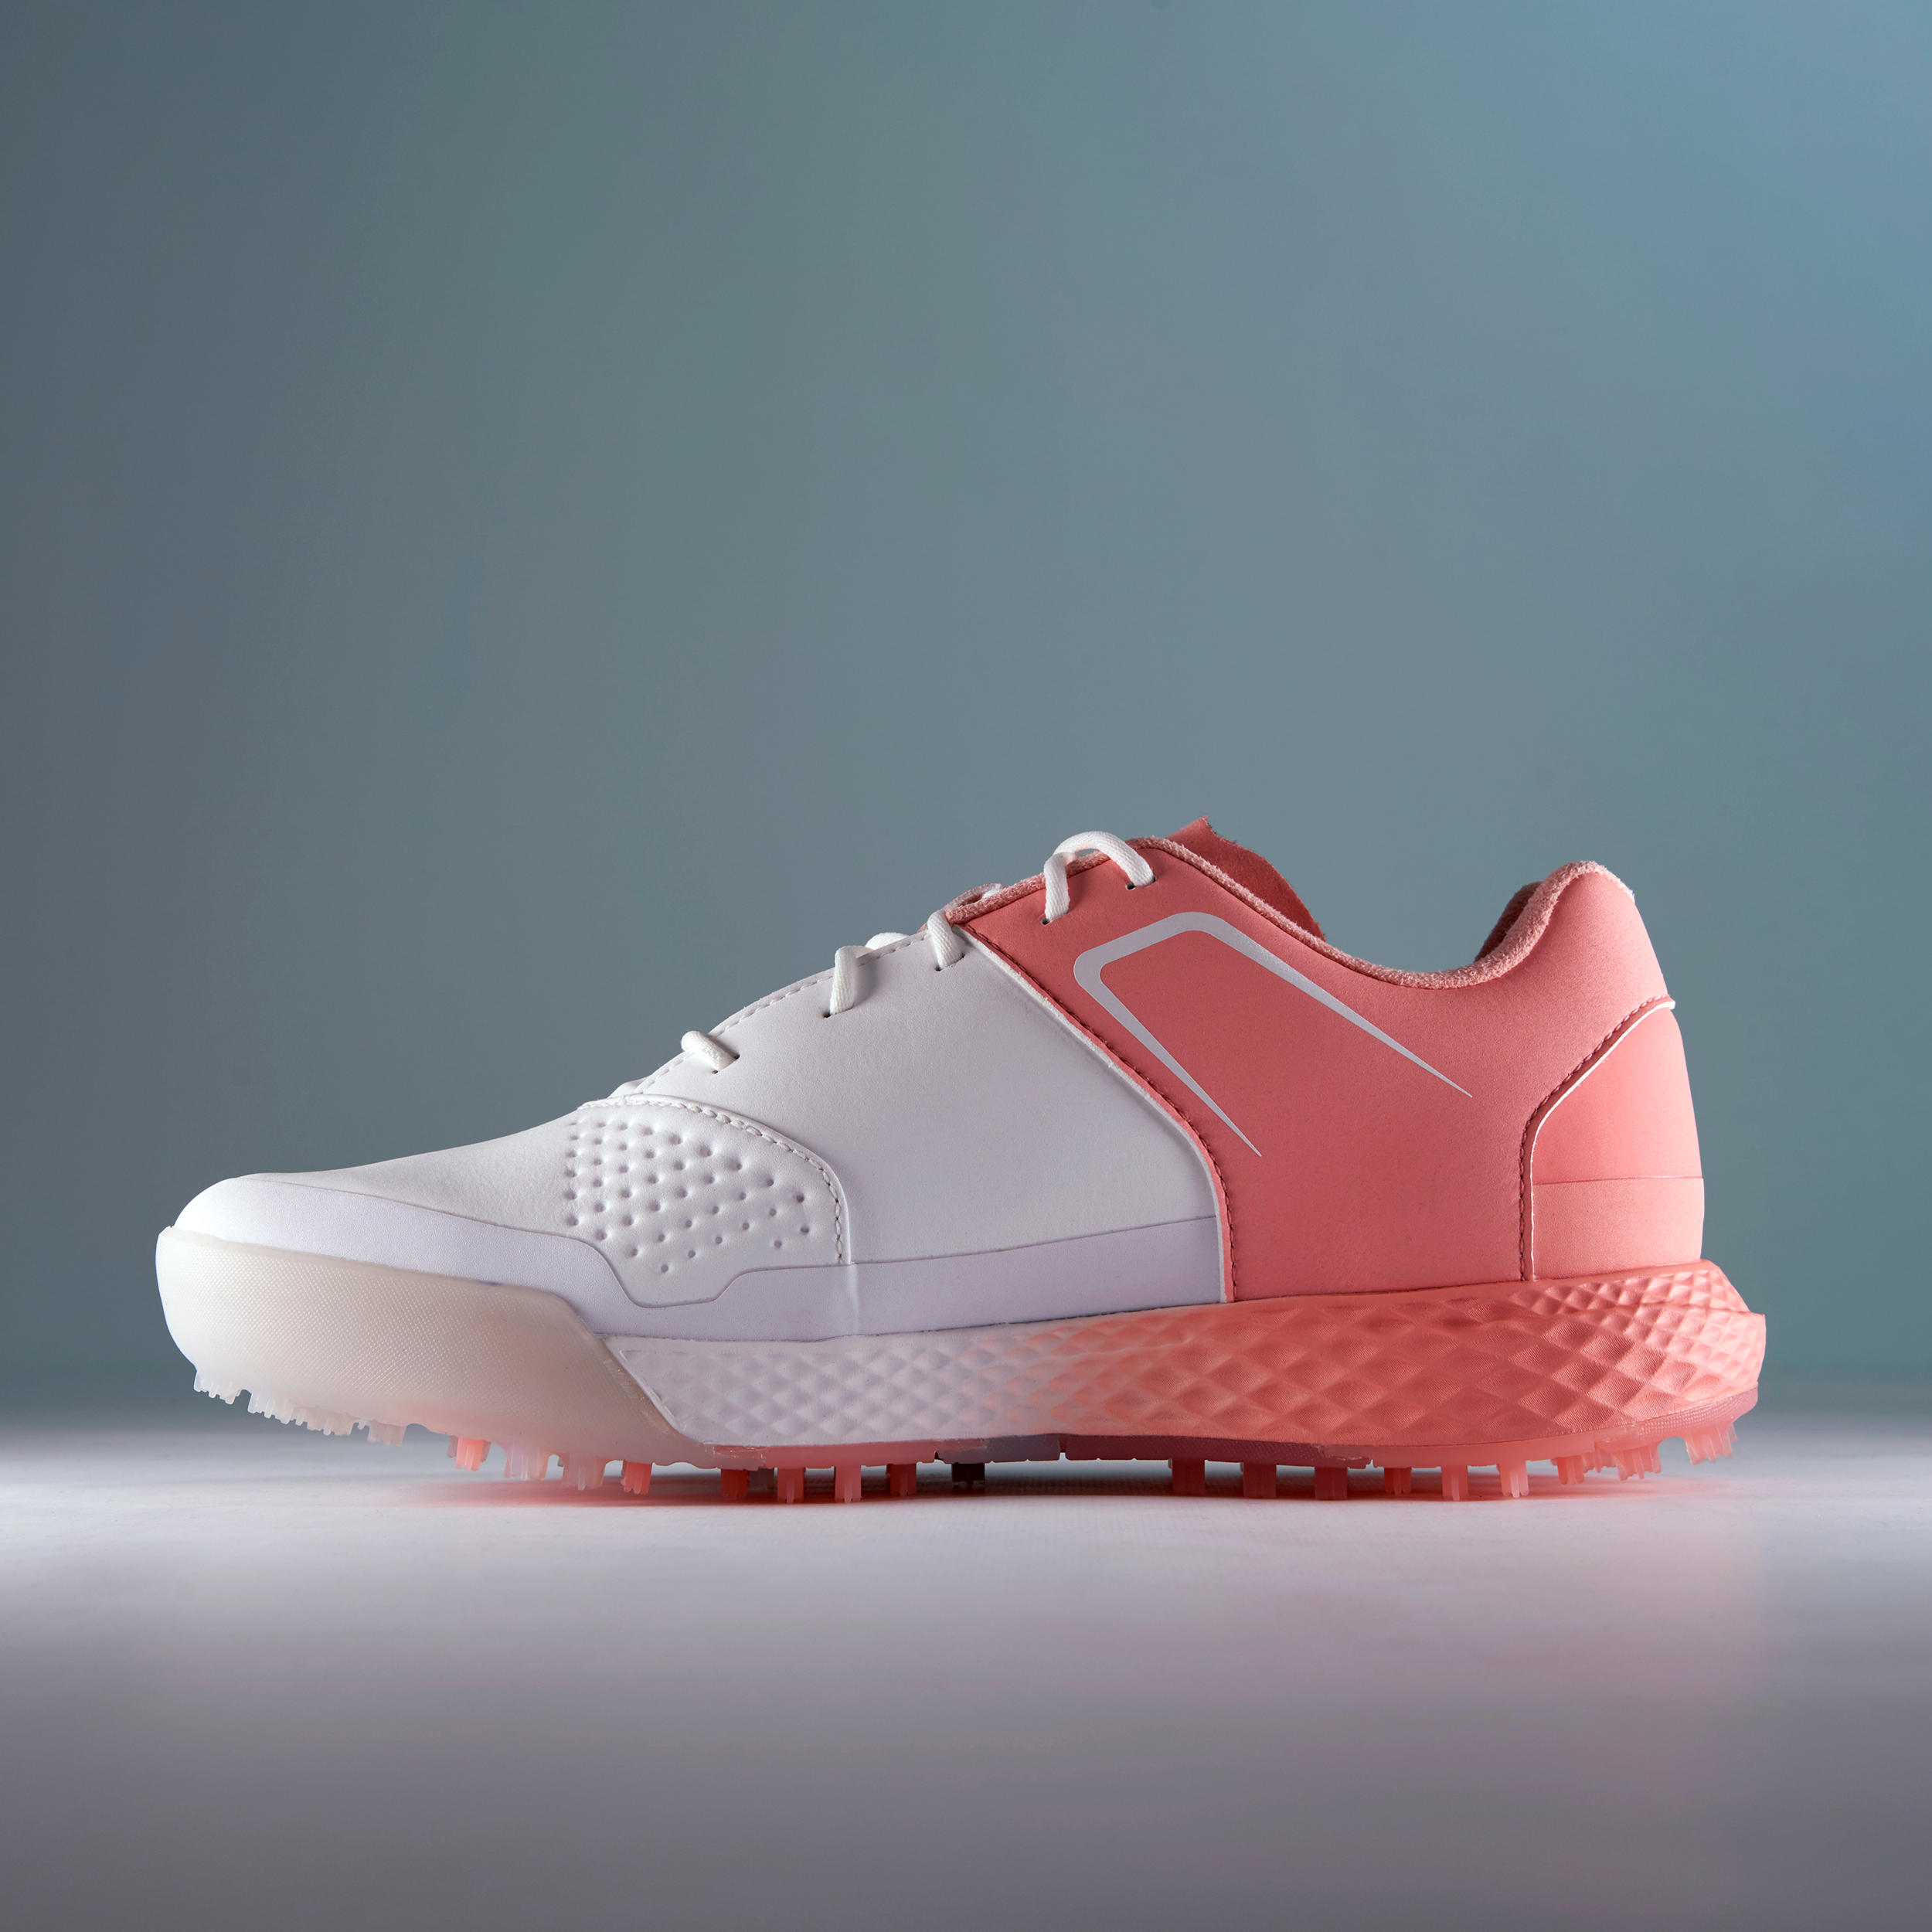 LADIES GRIP WATERPROOF GOLF SHOES WHITE AND PINK 6/13